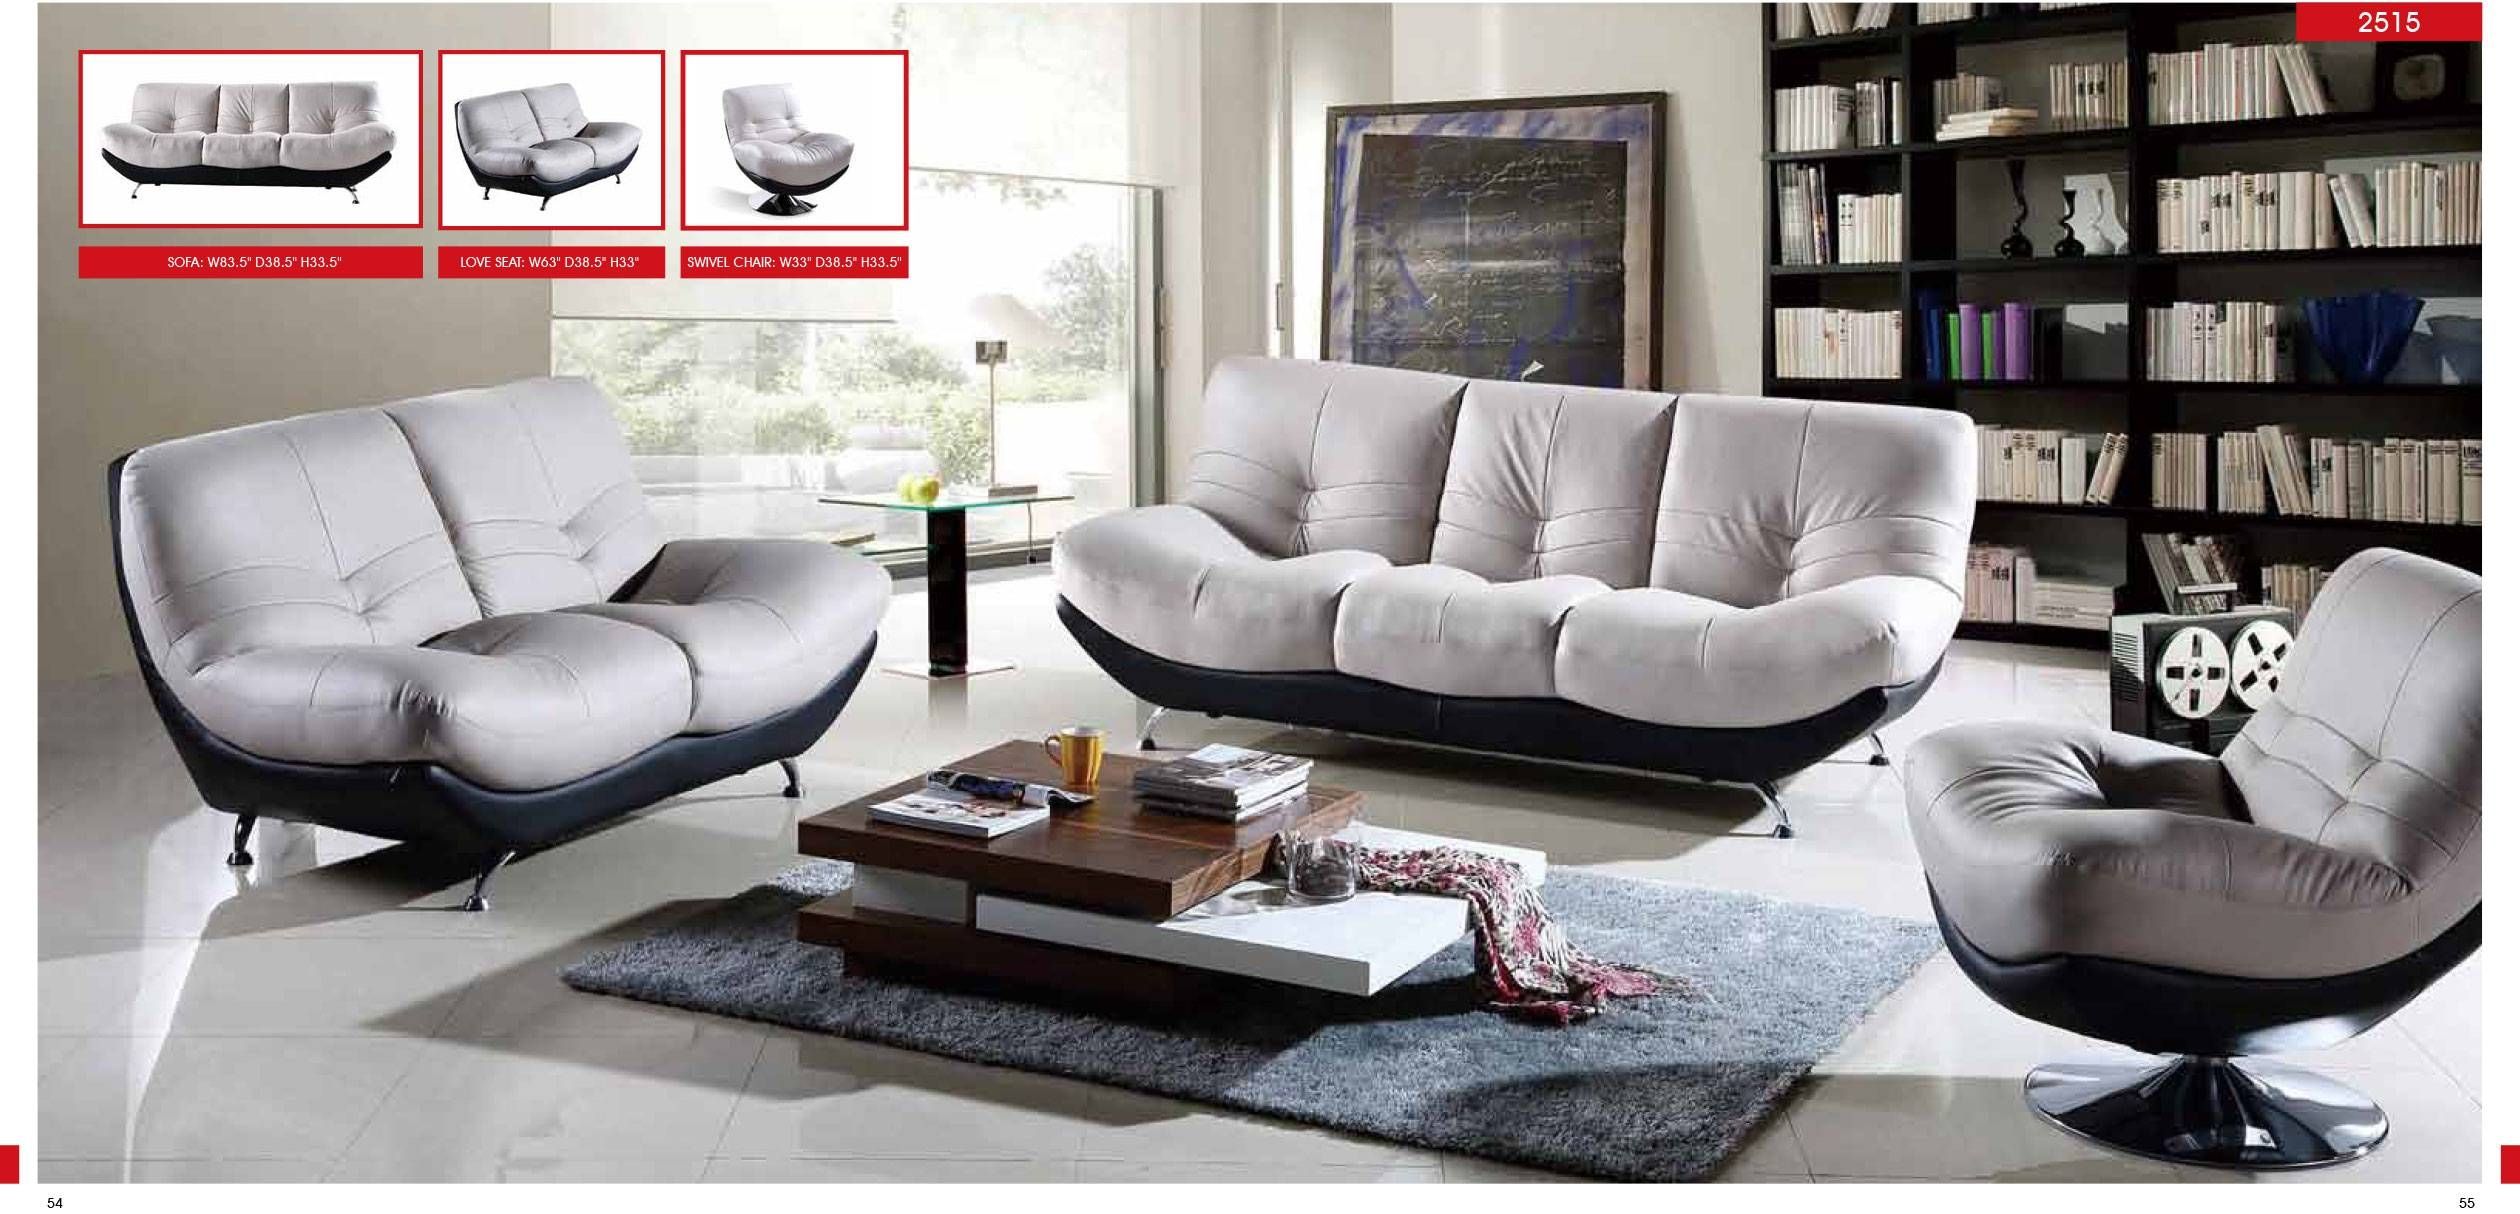 Modern Chairs Living Room | Home Design Ideas Intended For Living Room Sofa And Chair Sets (View 1 of 15)